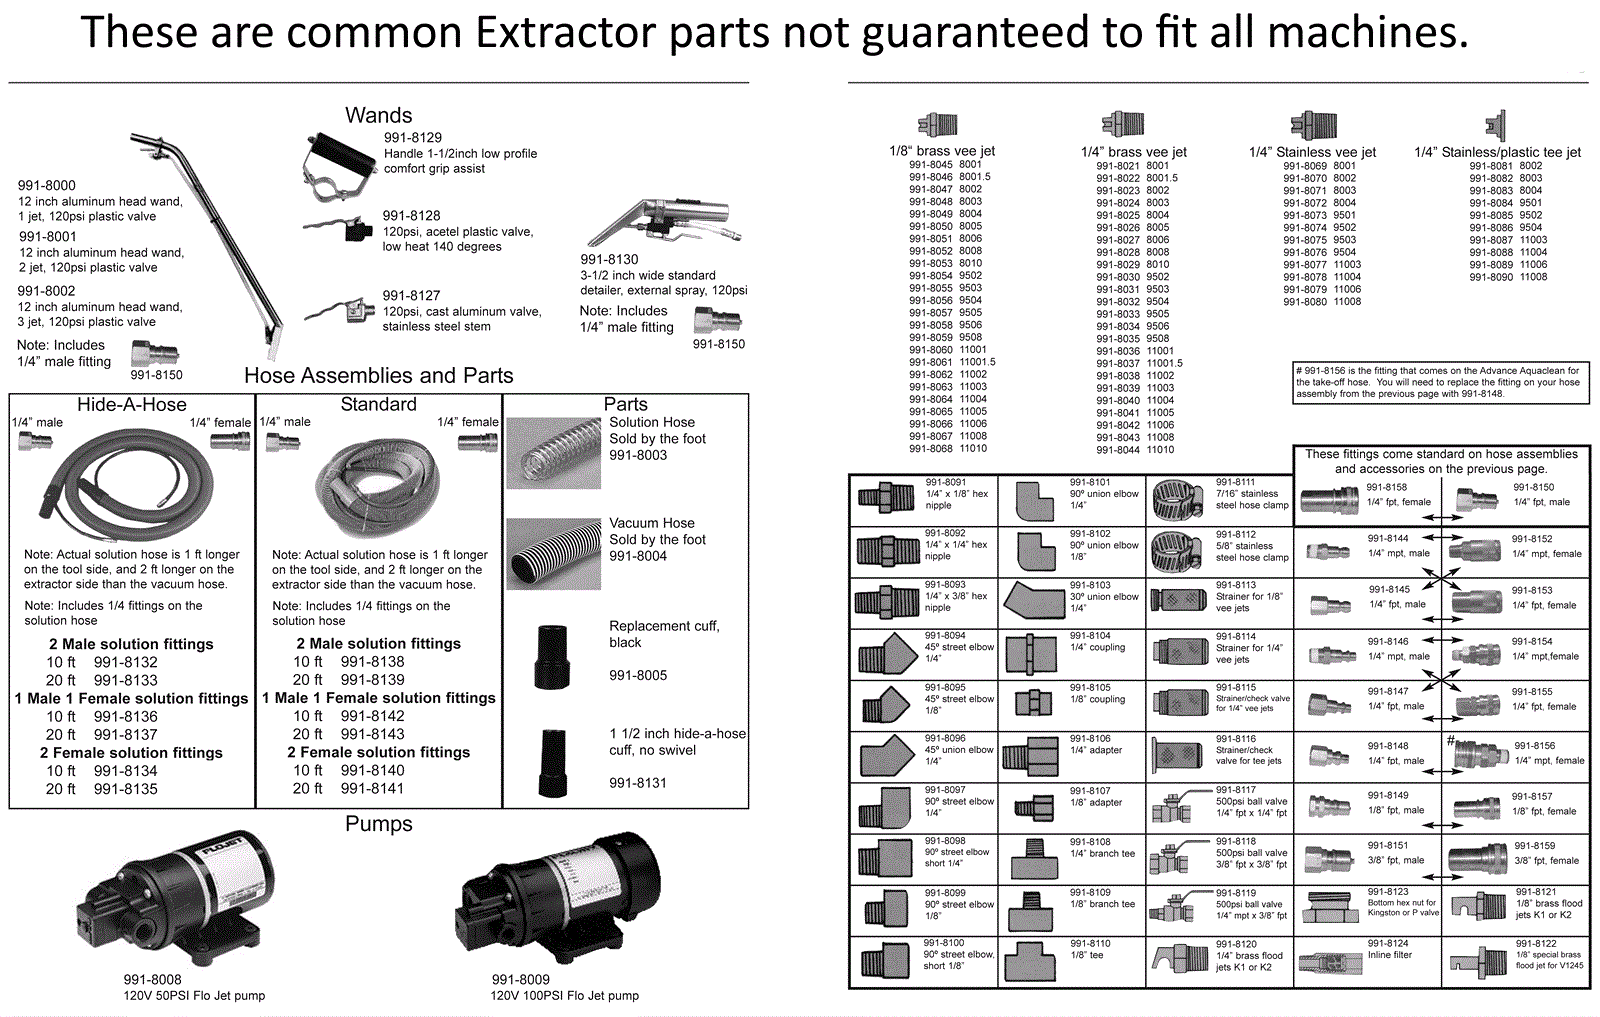 Full information for Extractor Fit-All Parts